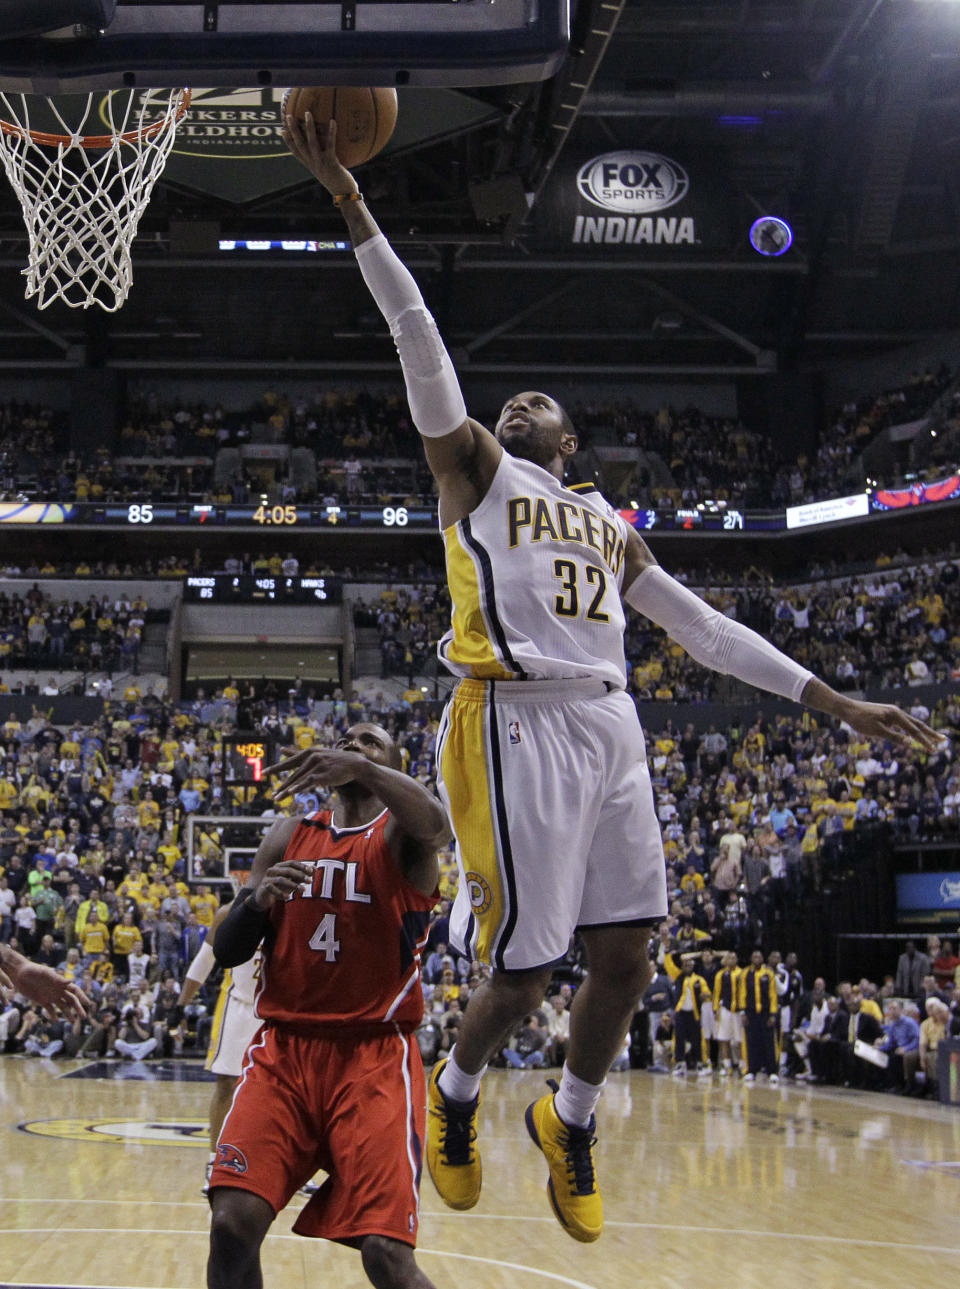 Indiana Pacers' C.J. Watson (32) puts up a shot against Atlanta Hawks' Paul Millsap (4) during the second half in Game 5 of an opening-round NBA basketball playoff series Monday, April 28, 2014, in Indianapolis. Atlanta defeated Indiana 107-97. (AP Photo/Darron Cummings)